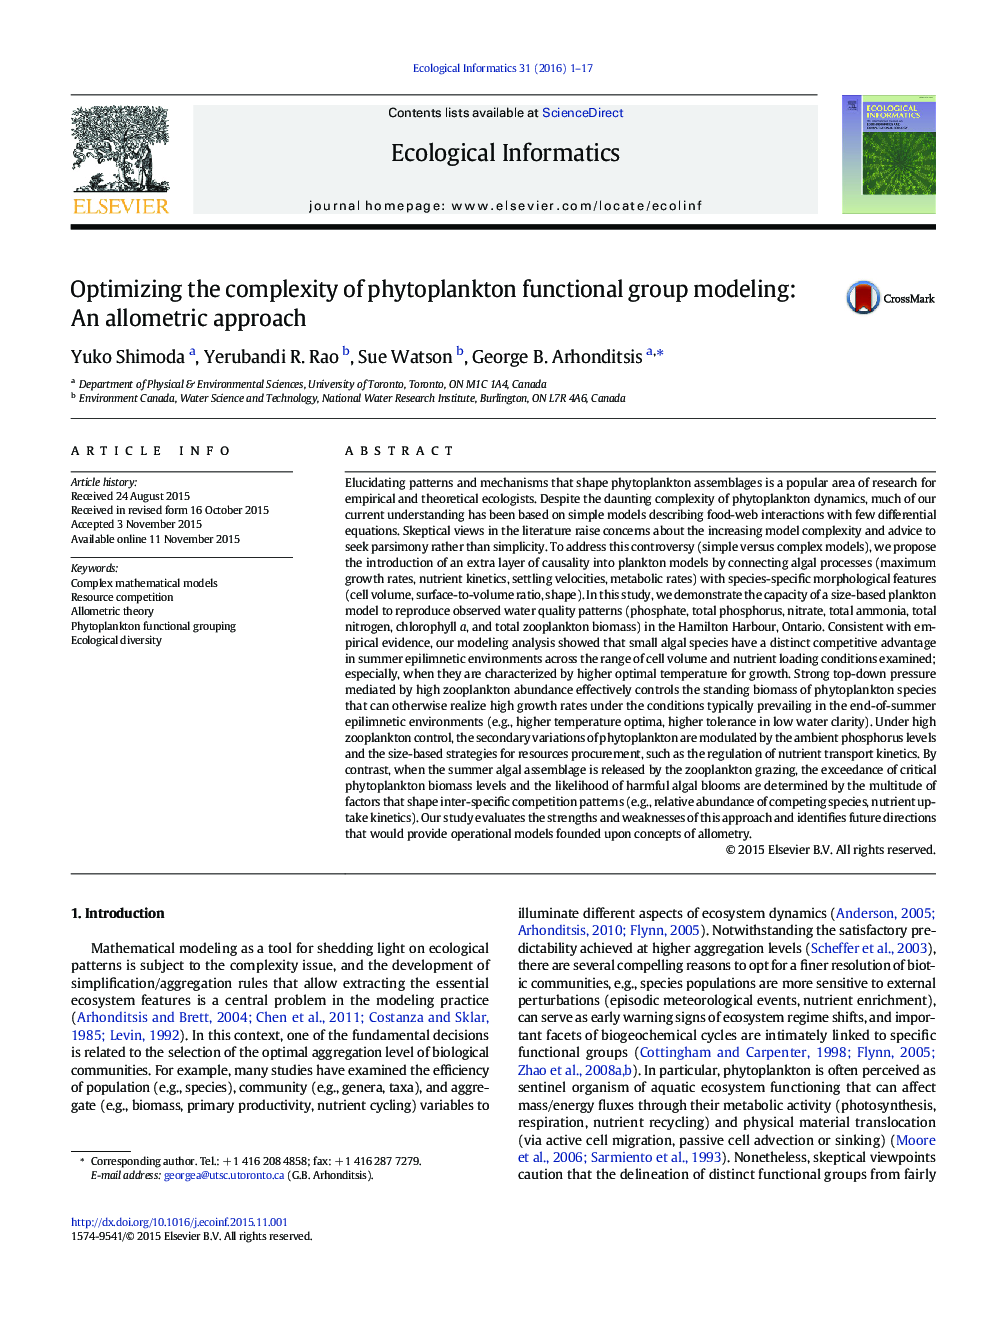 Optimizing the complexity of phytoplankton functional group modeling: An allometric approach